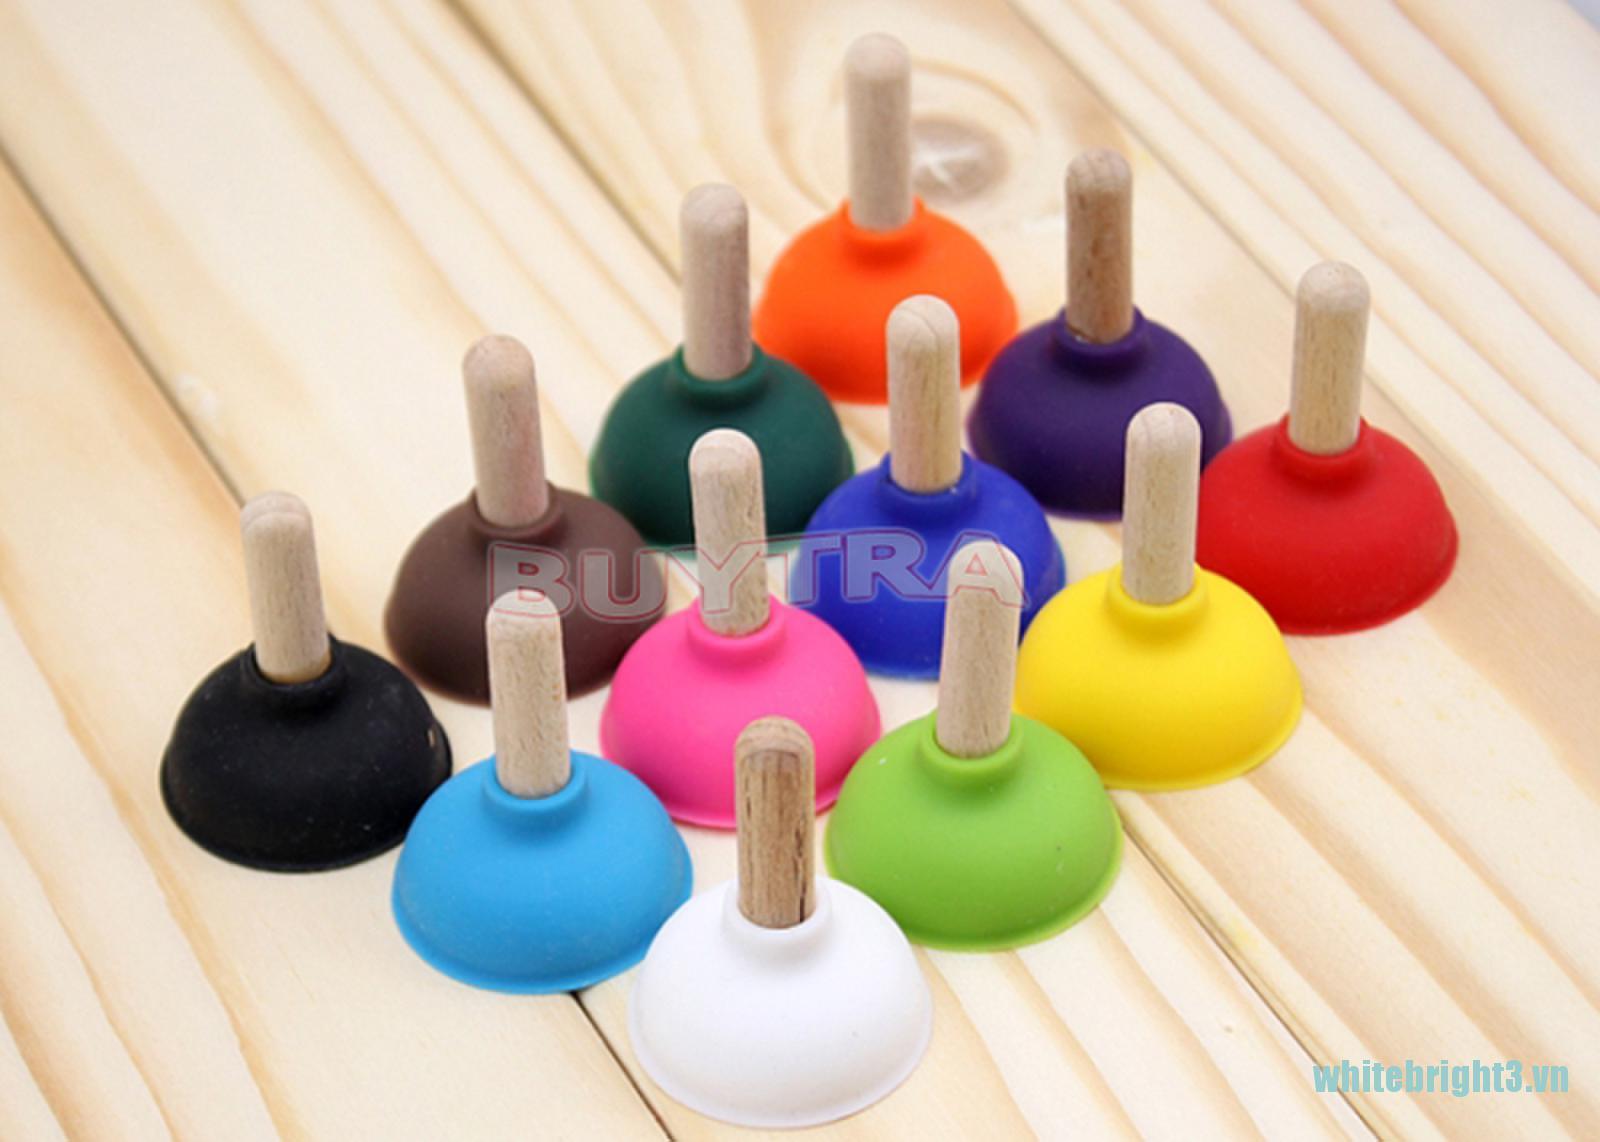 IPHONE White / Lot 6 Pcs Plunger Holder Sucker Toilet Shape Wood Stand Cell Phone Phone